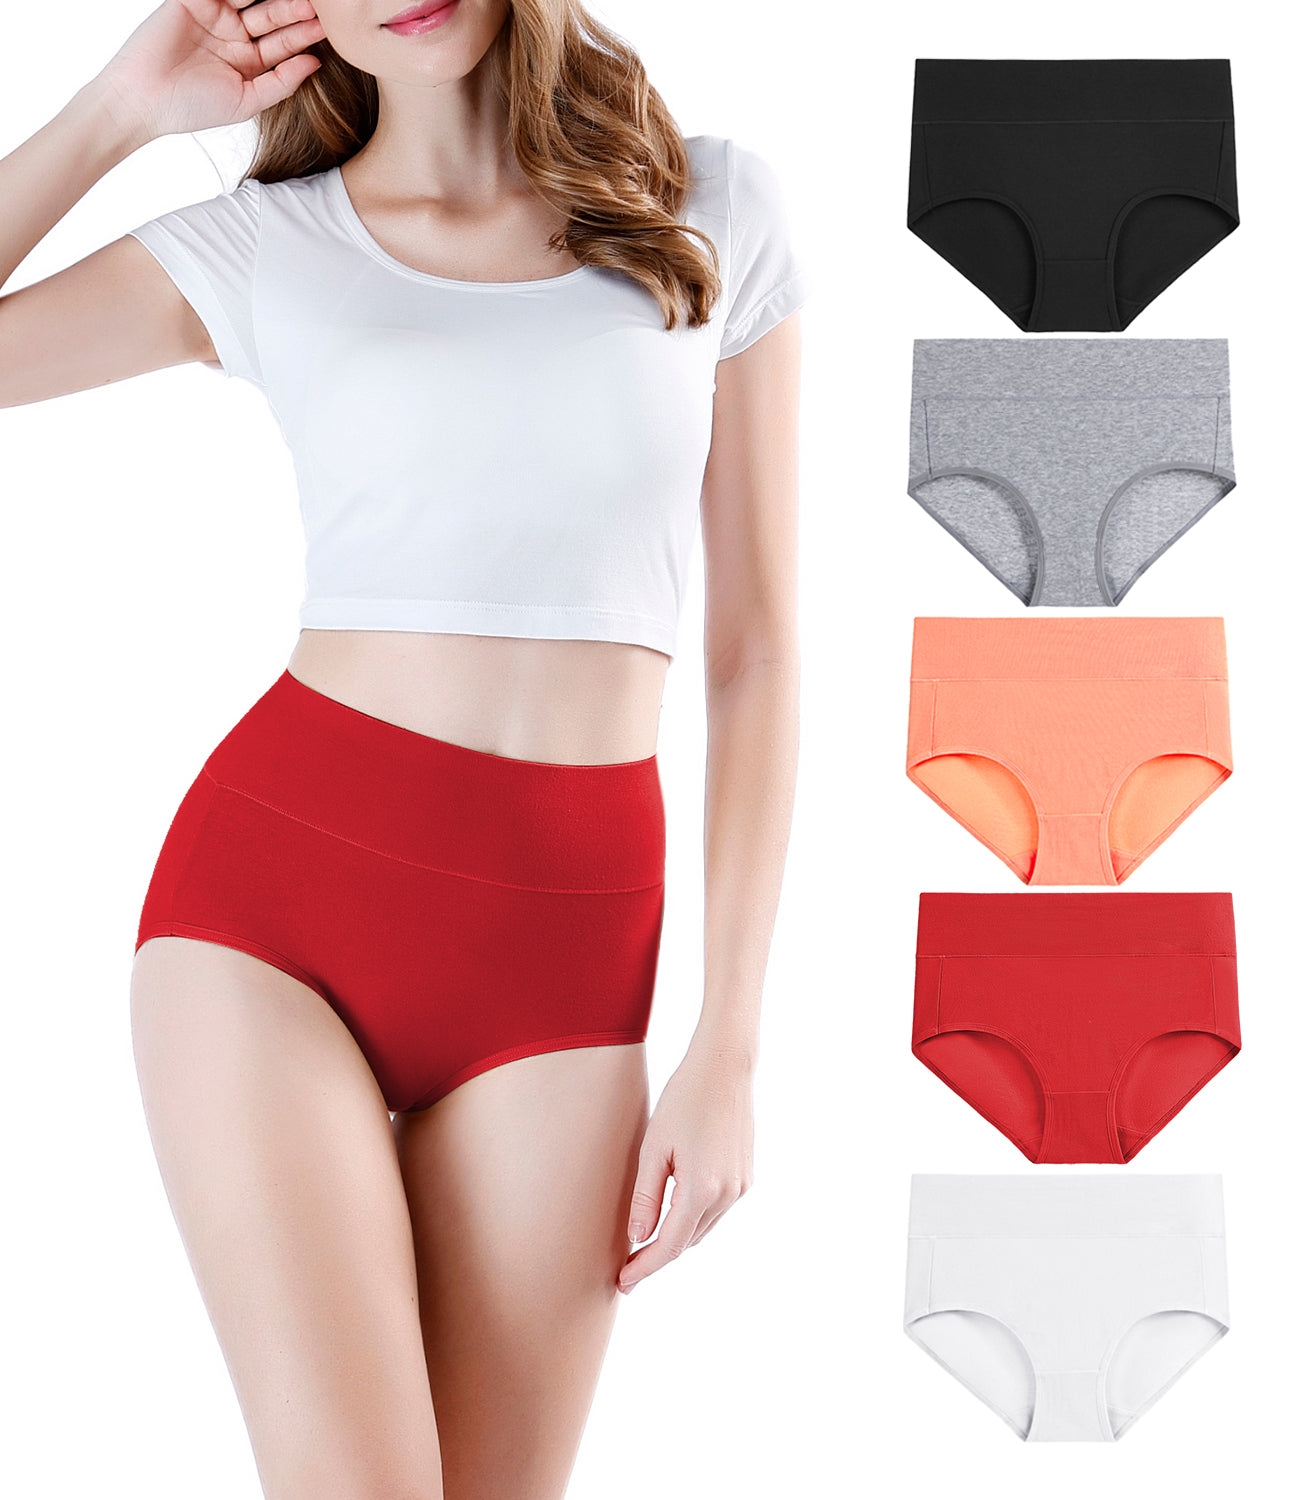  Womens Cotton High Waisted Underwear Ladies Soft Breathable  Panties Stretch Briefs S-5XL Plus Size Multipack 3X-Large